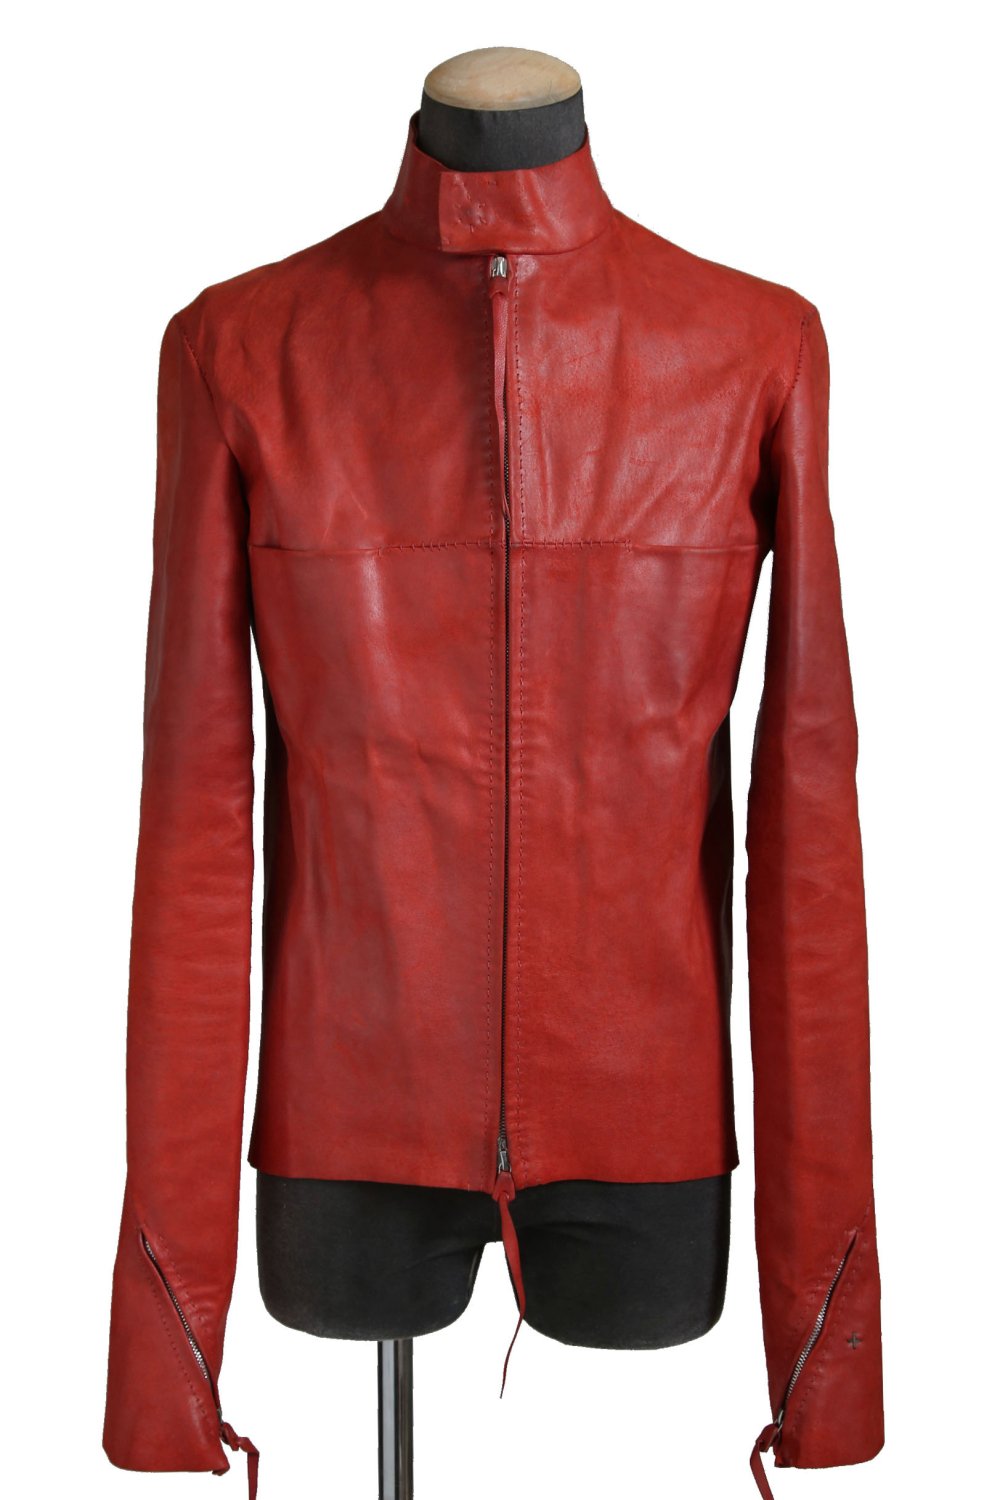 <img class='new_mark_img1' src='https://img.shop-pro.jp/img/new/icons1.gif' style='border:none;display:inline;margin:0px;padding:0px;width:auto;' />̤ m.a+ / 18SS LEATHER BIKER JACKET / GUIDI PIG REVERSE / size 48(S) RED २